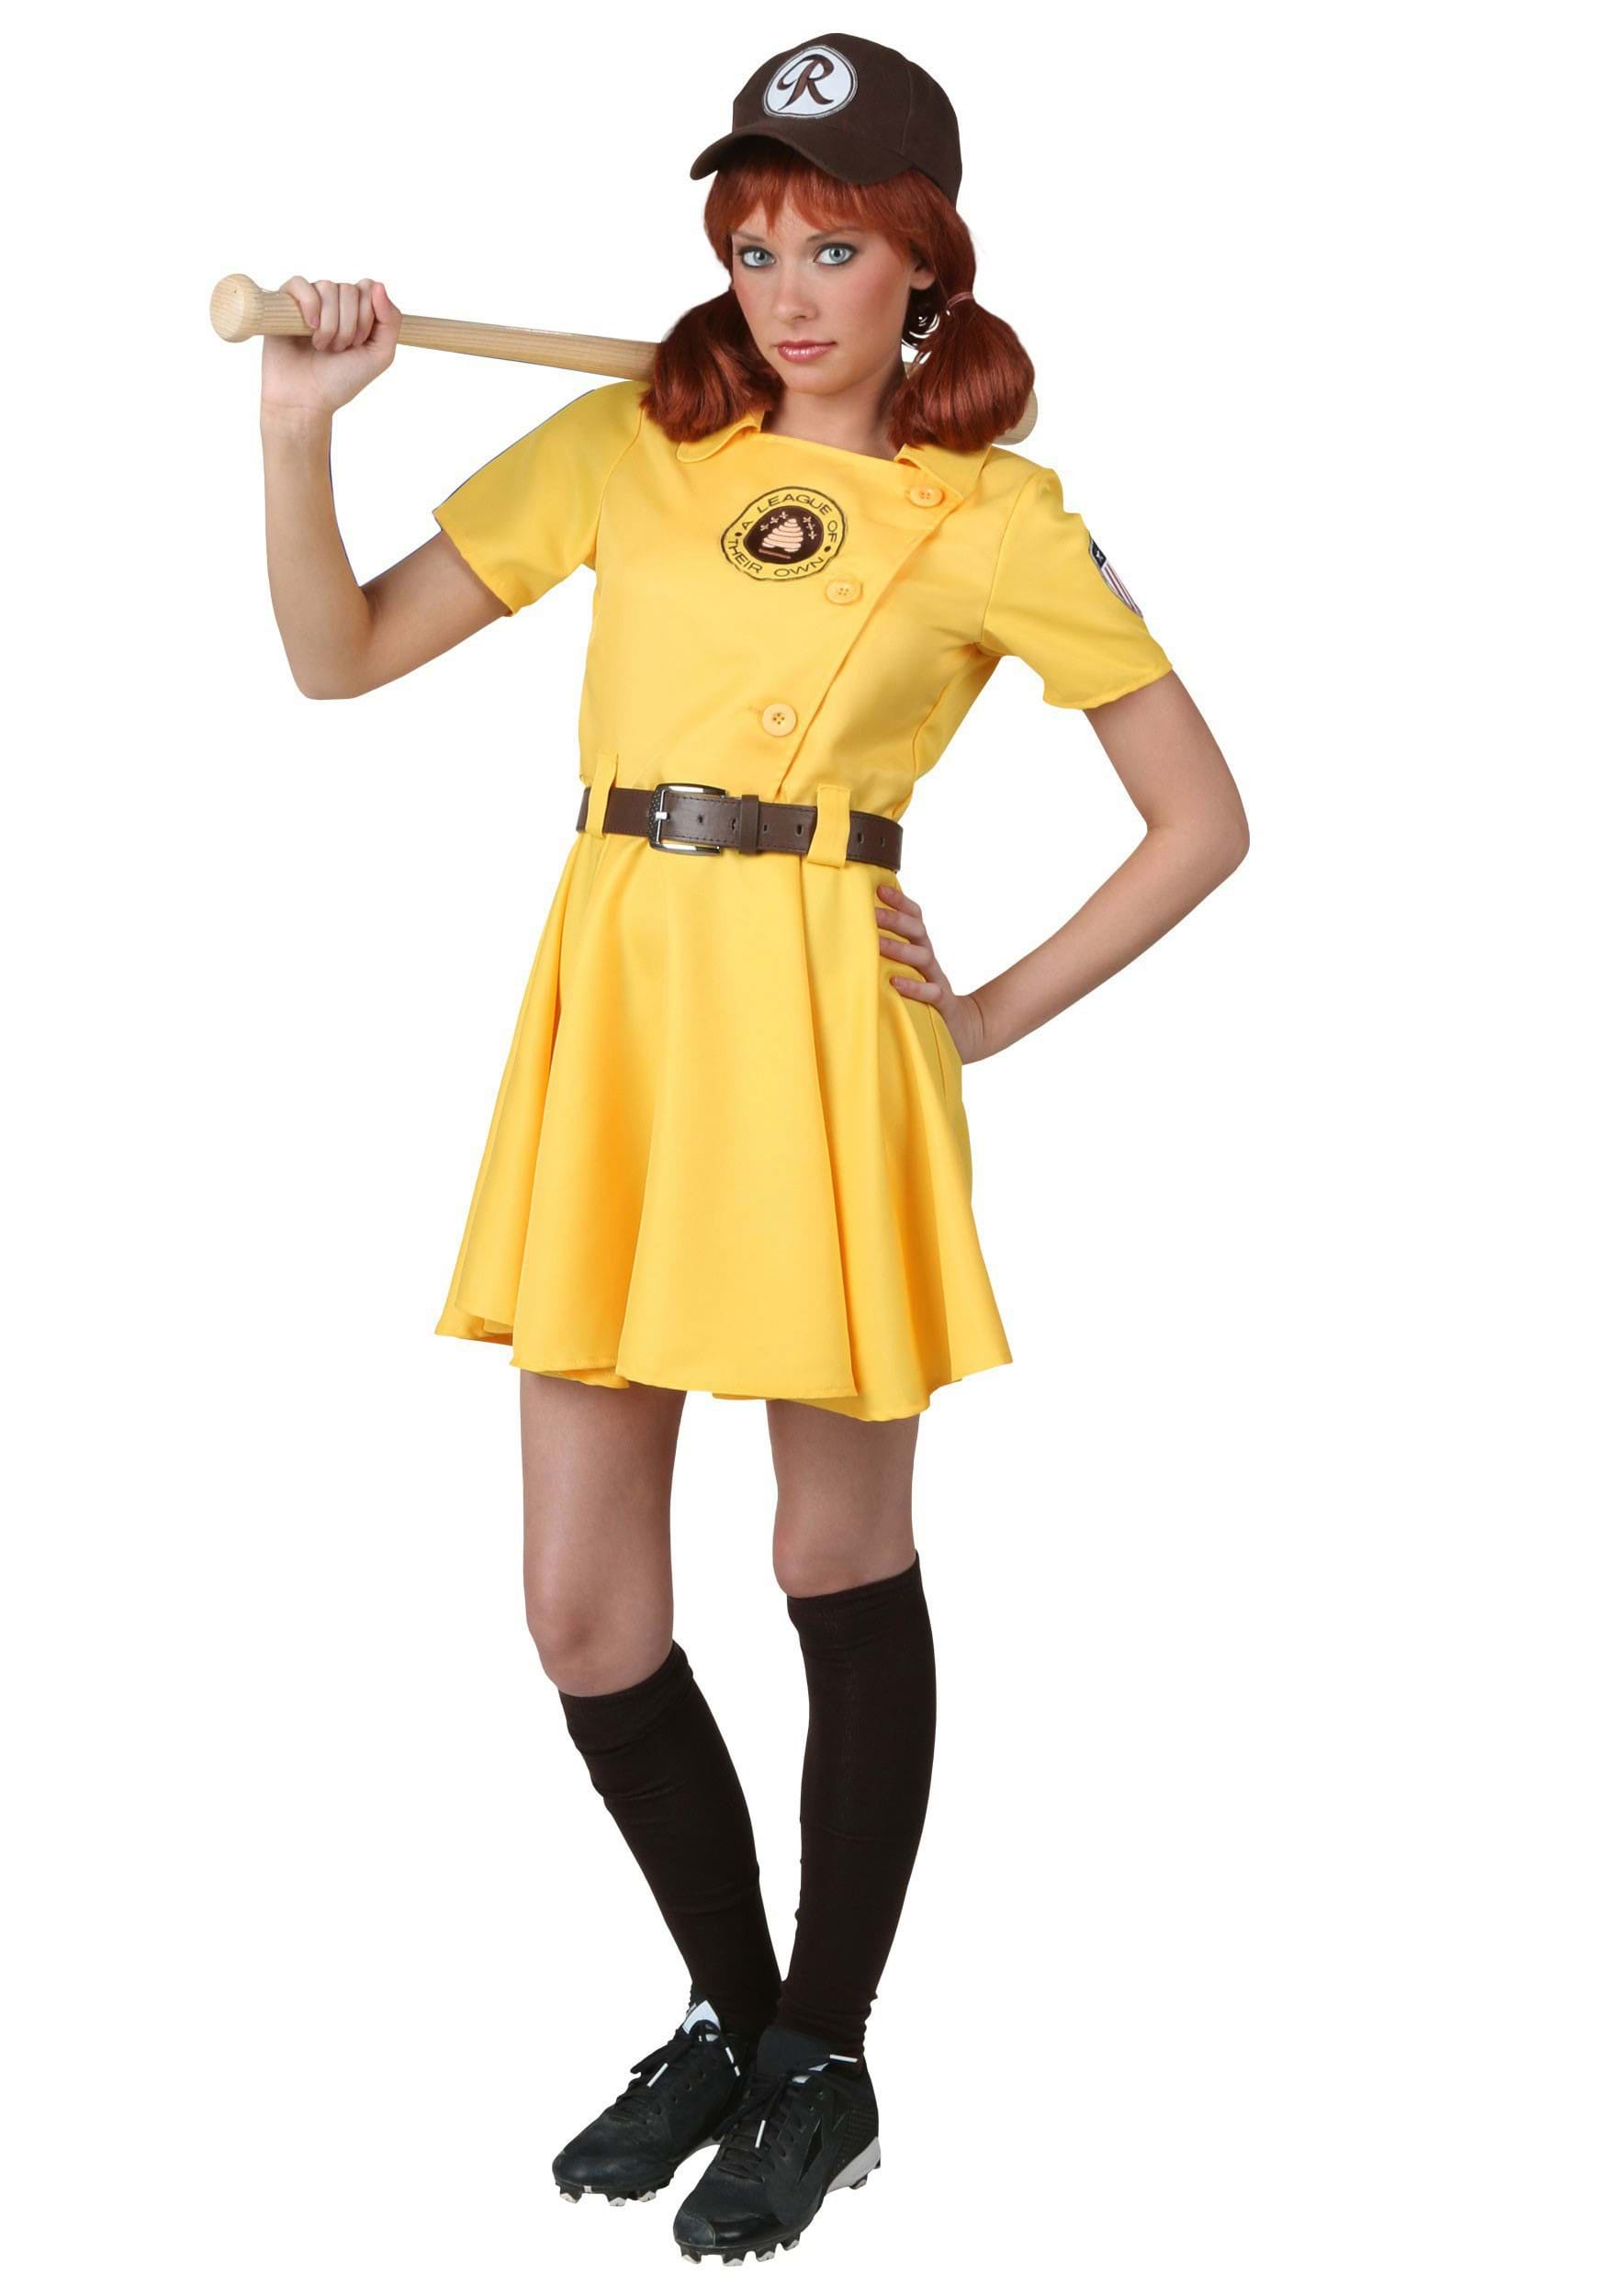 Photos - Fancy Dress League FUN Costumes Plus Size Women's A  of Their Own Kit Costume | Exclusi 